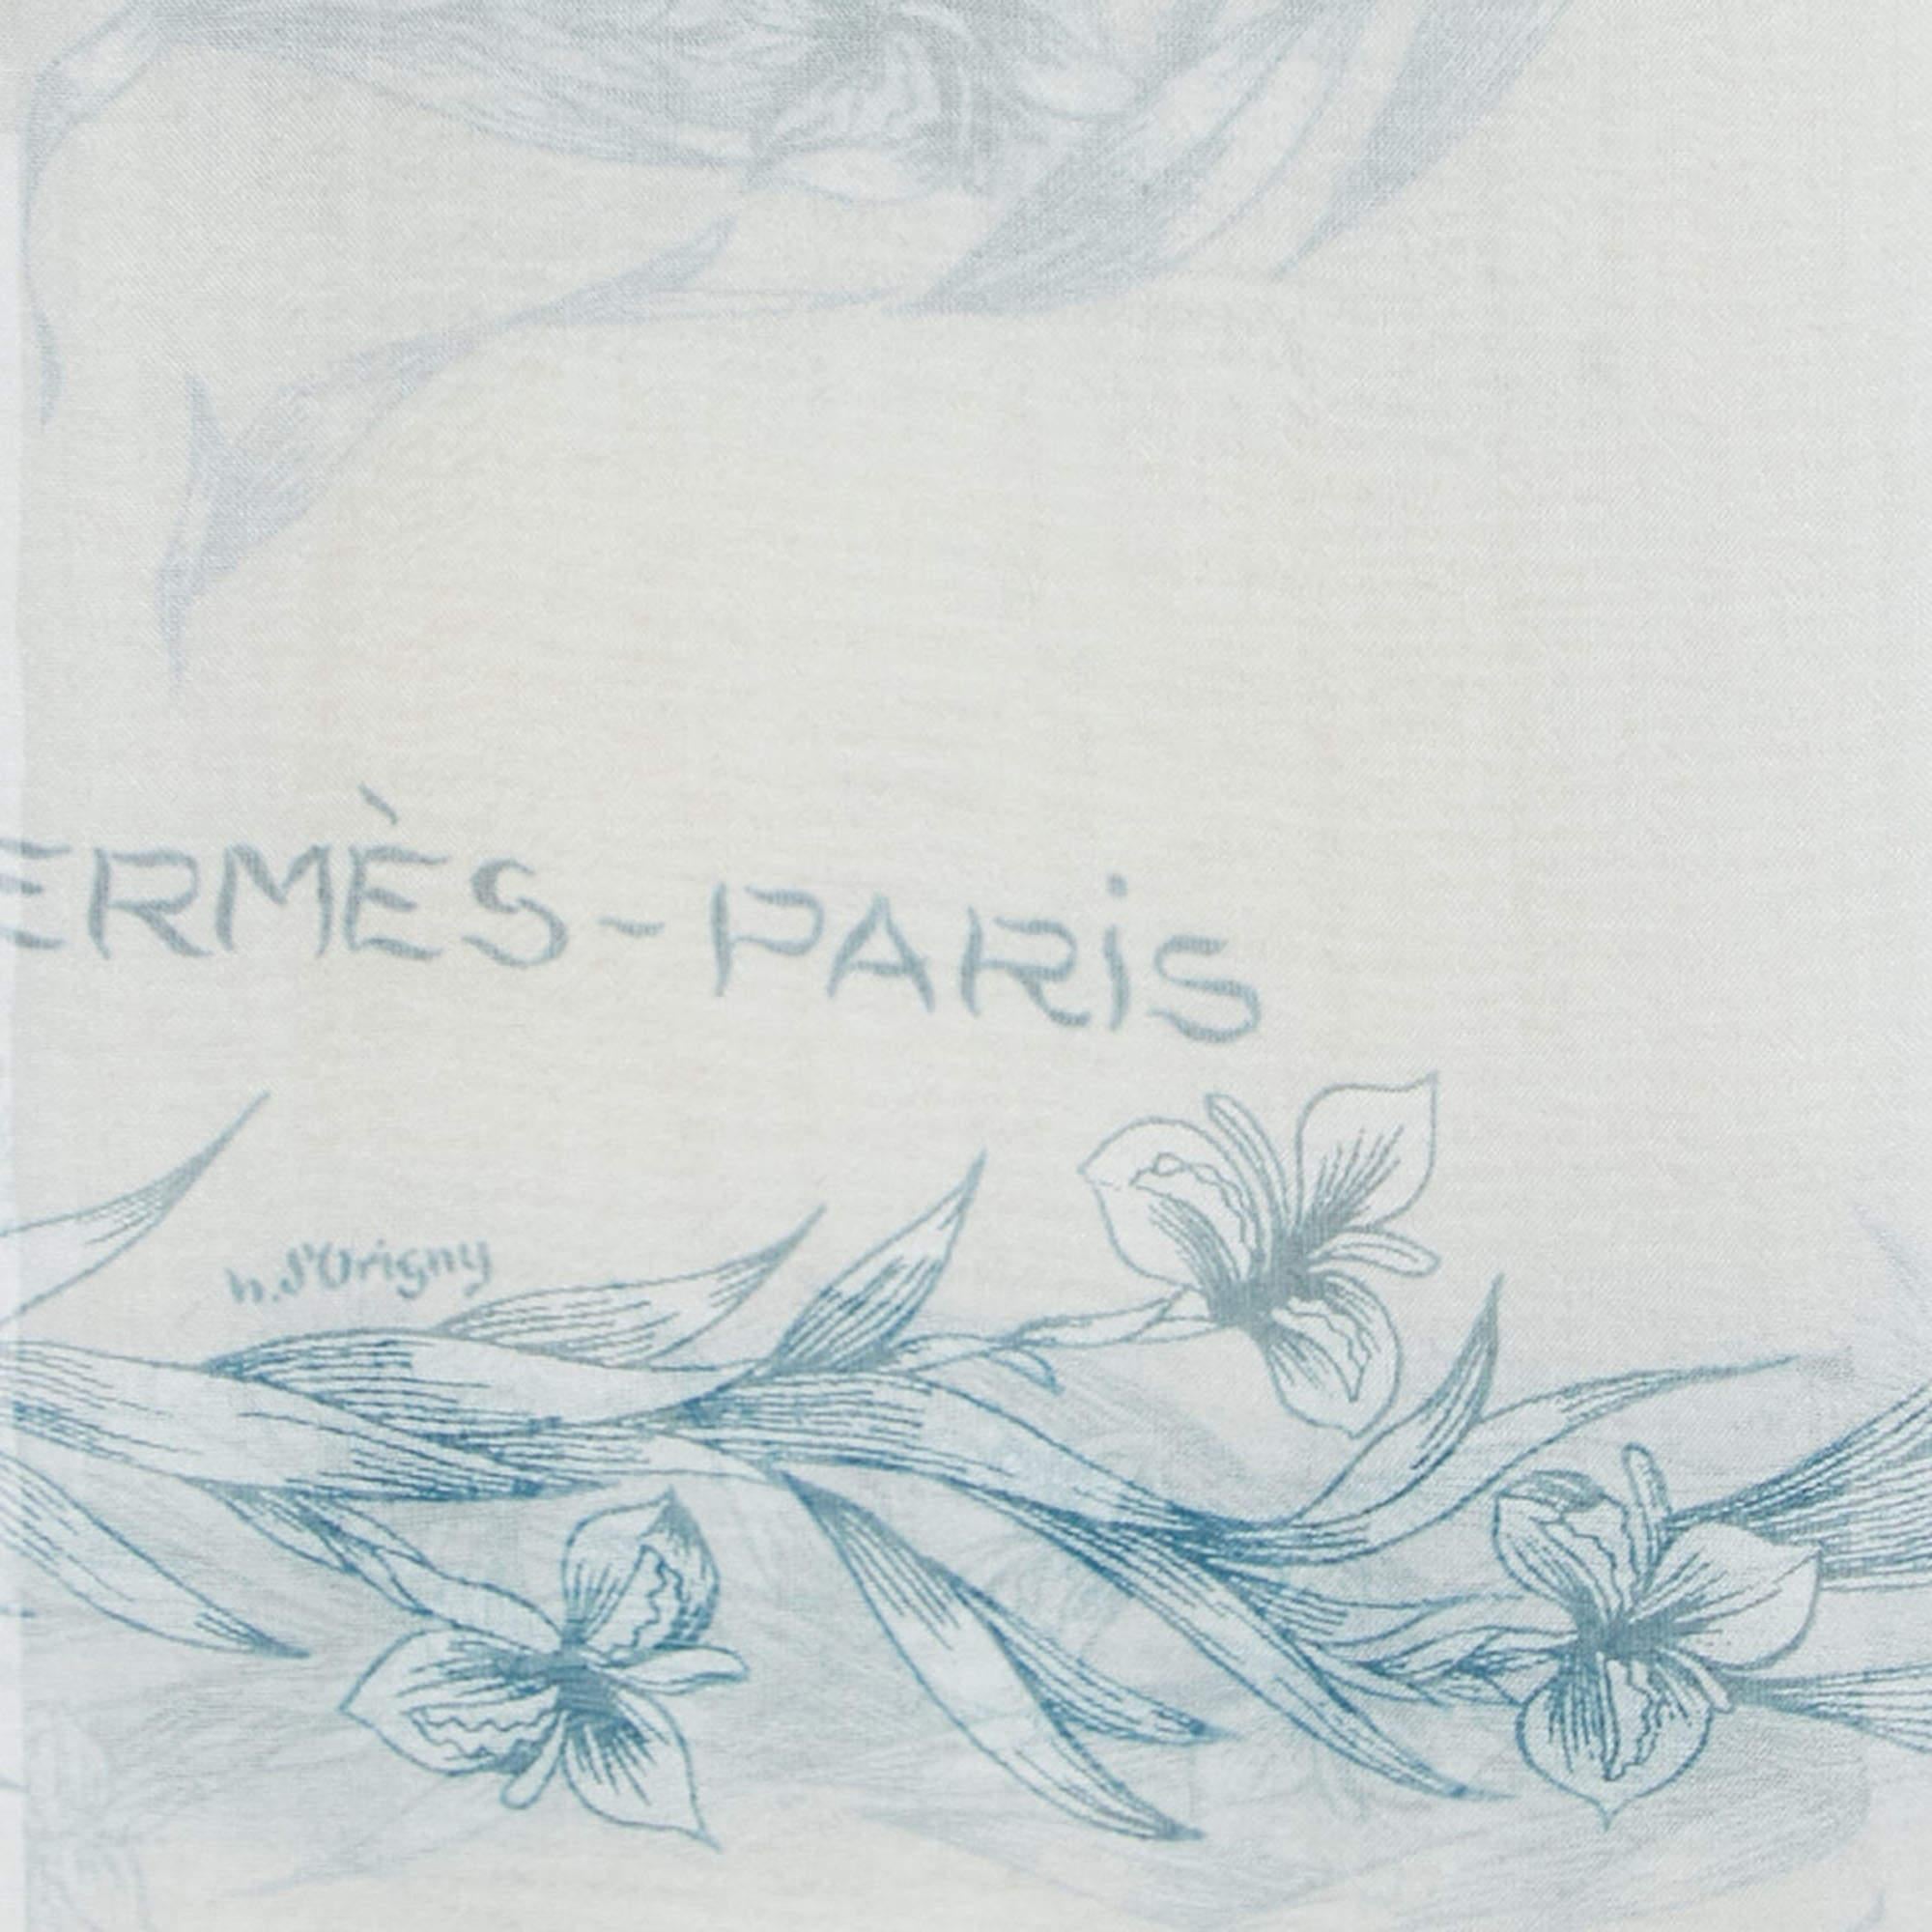 An essential Hermès accessory, the label's scarves are as iconic as any other creation from the brand and are collector's favorites. This rendition is carefully cut from luxurious silk and designed with an intricate print. There are endless ways to